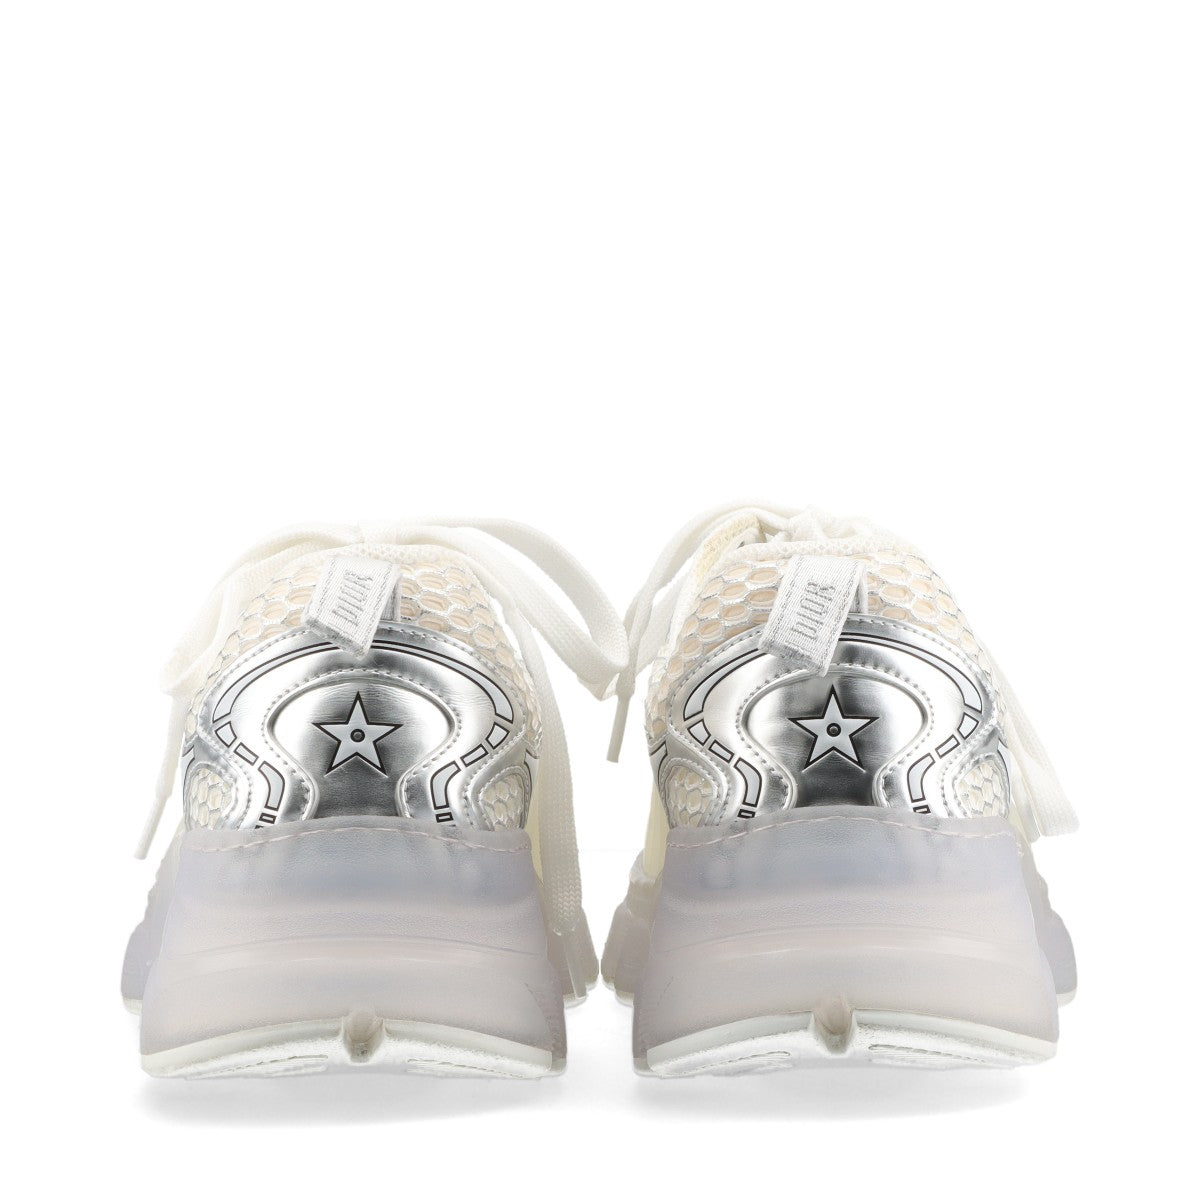 Christian Dior DIOR VIBE Leather × Rubber Sneakers 39.5 Ladies' silver x white Mesh logo charm